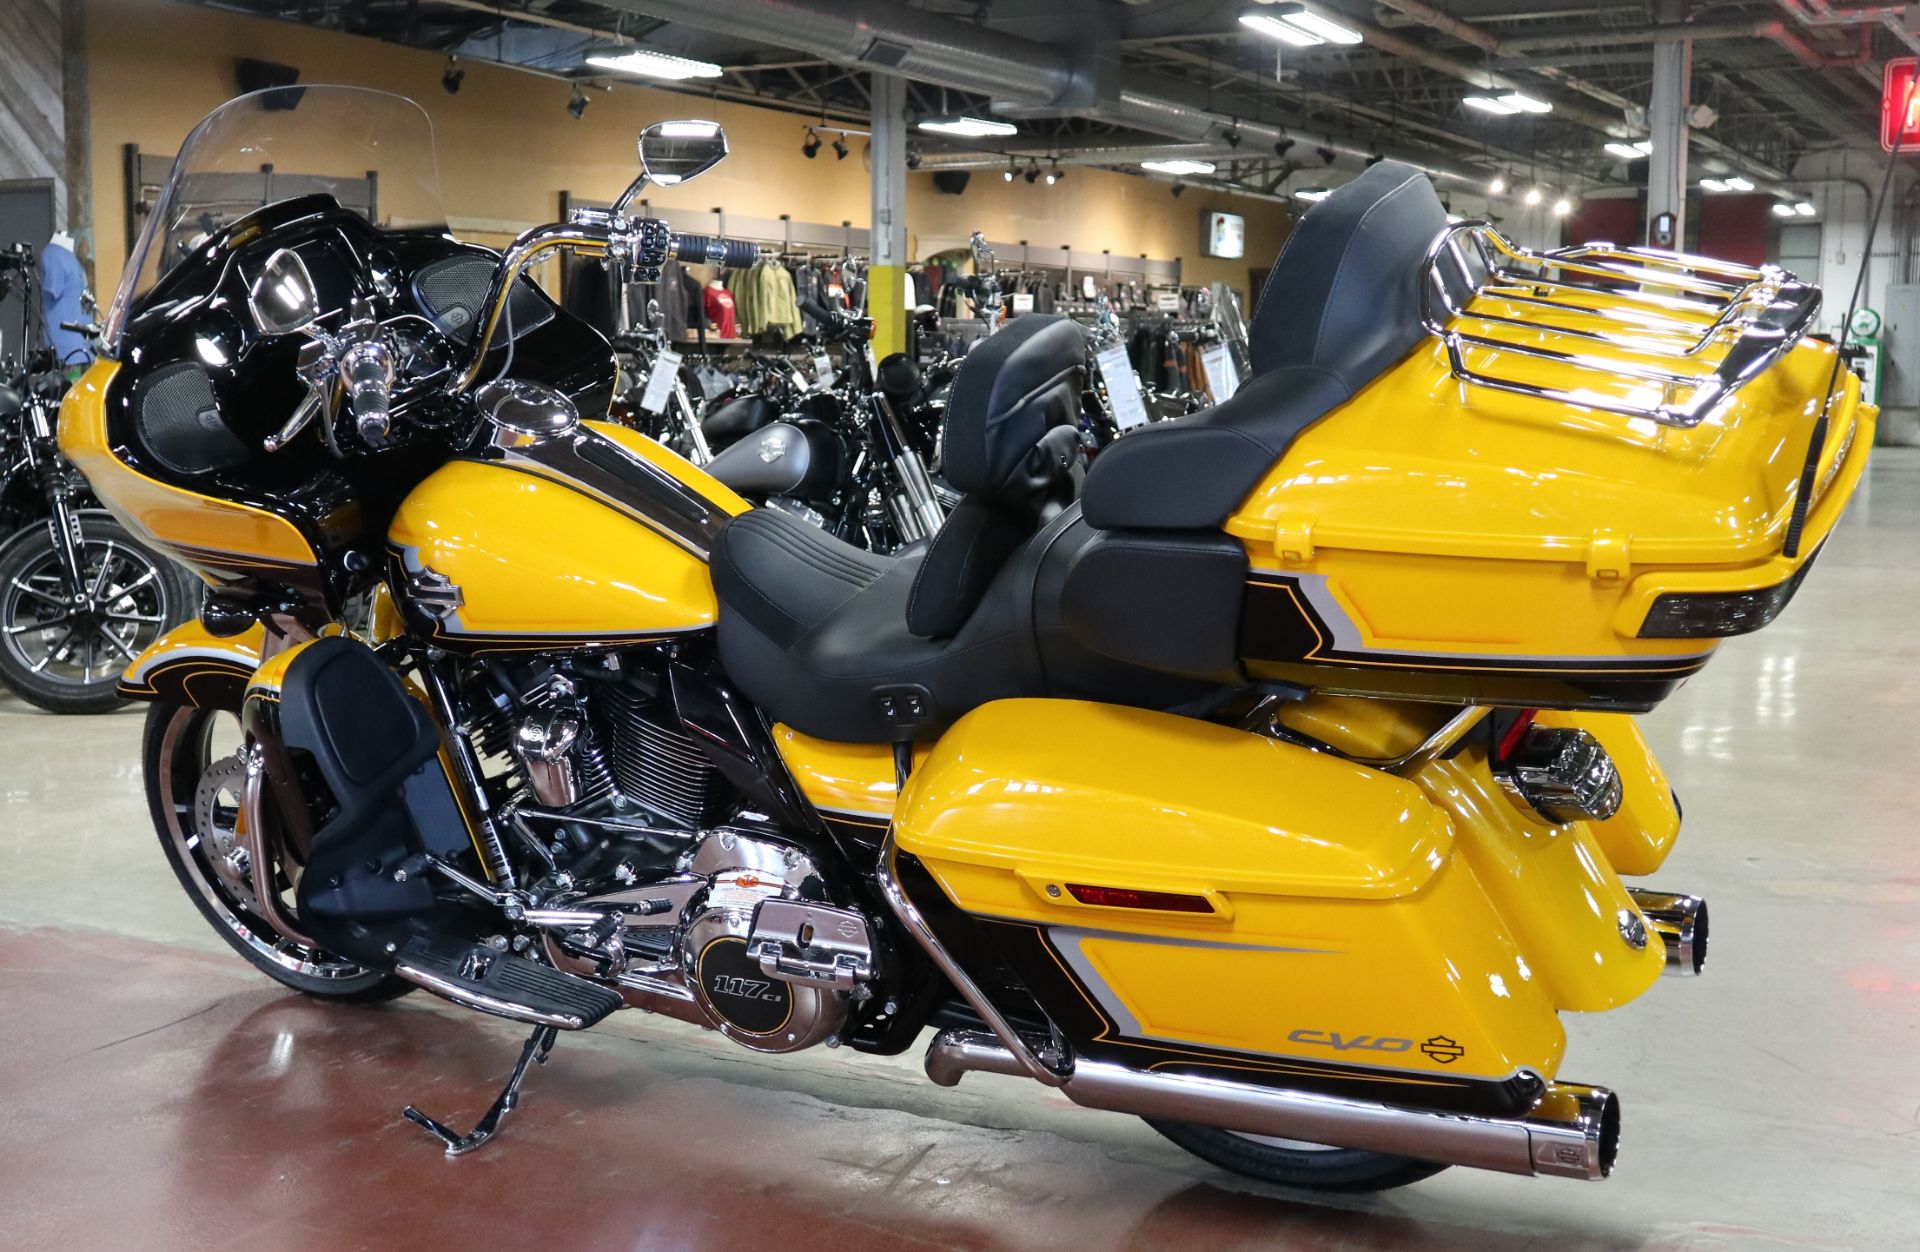 2022 Harley-Davidson CVO™ Road Glide® Limited in New London, Connecticut - Photo 6